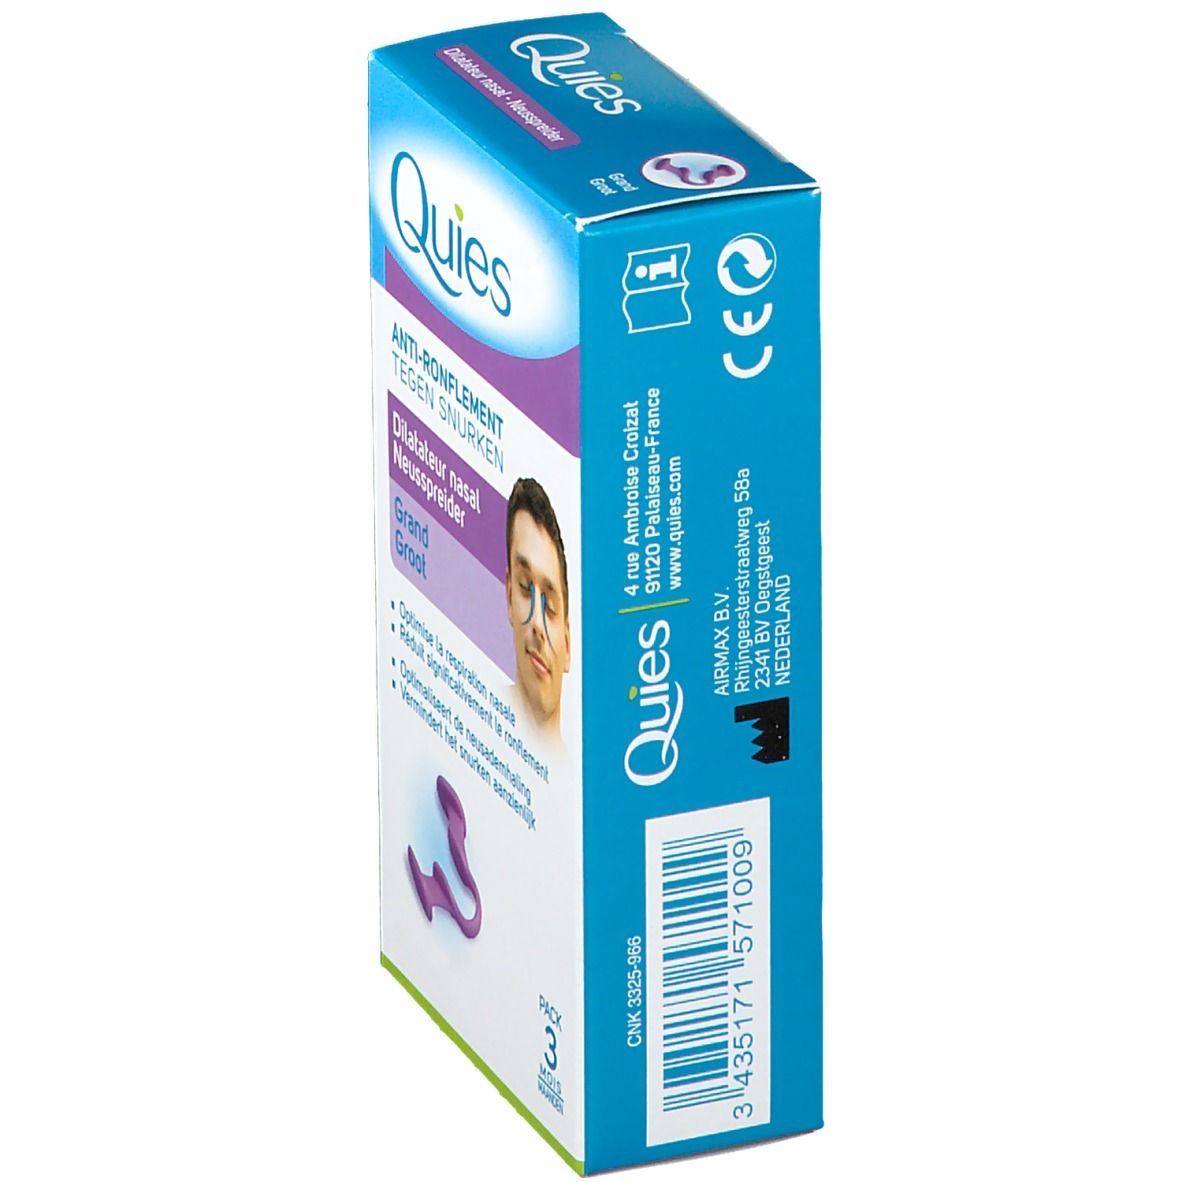 Quies® Dilatateur Nasal Anti-ronflement Grand 1 pc(s) - Redcare Pharmacie